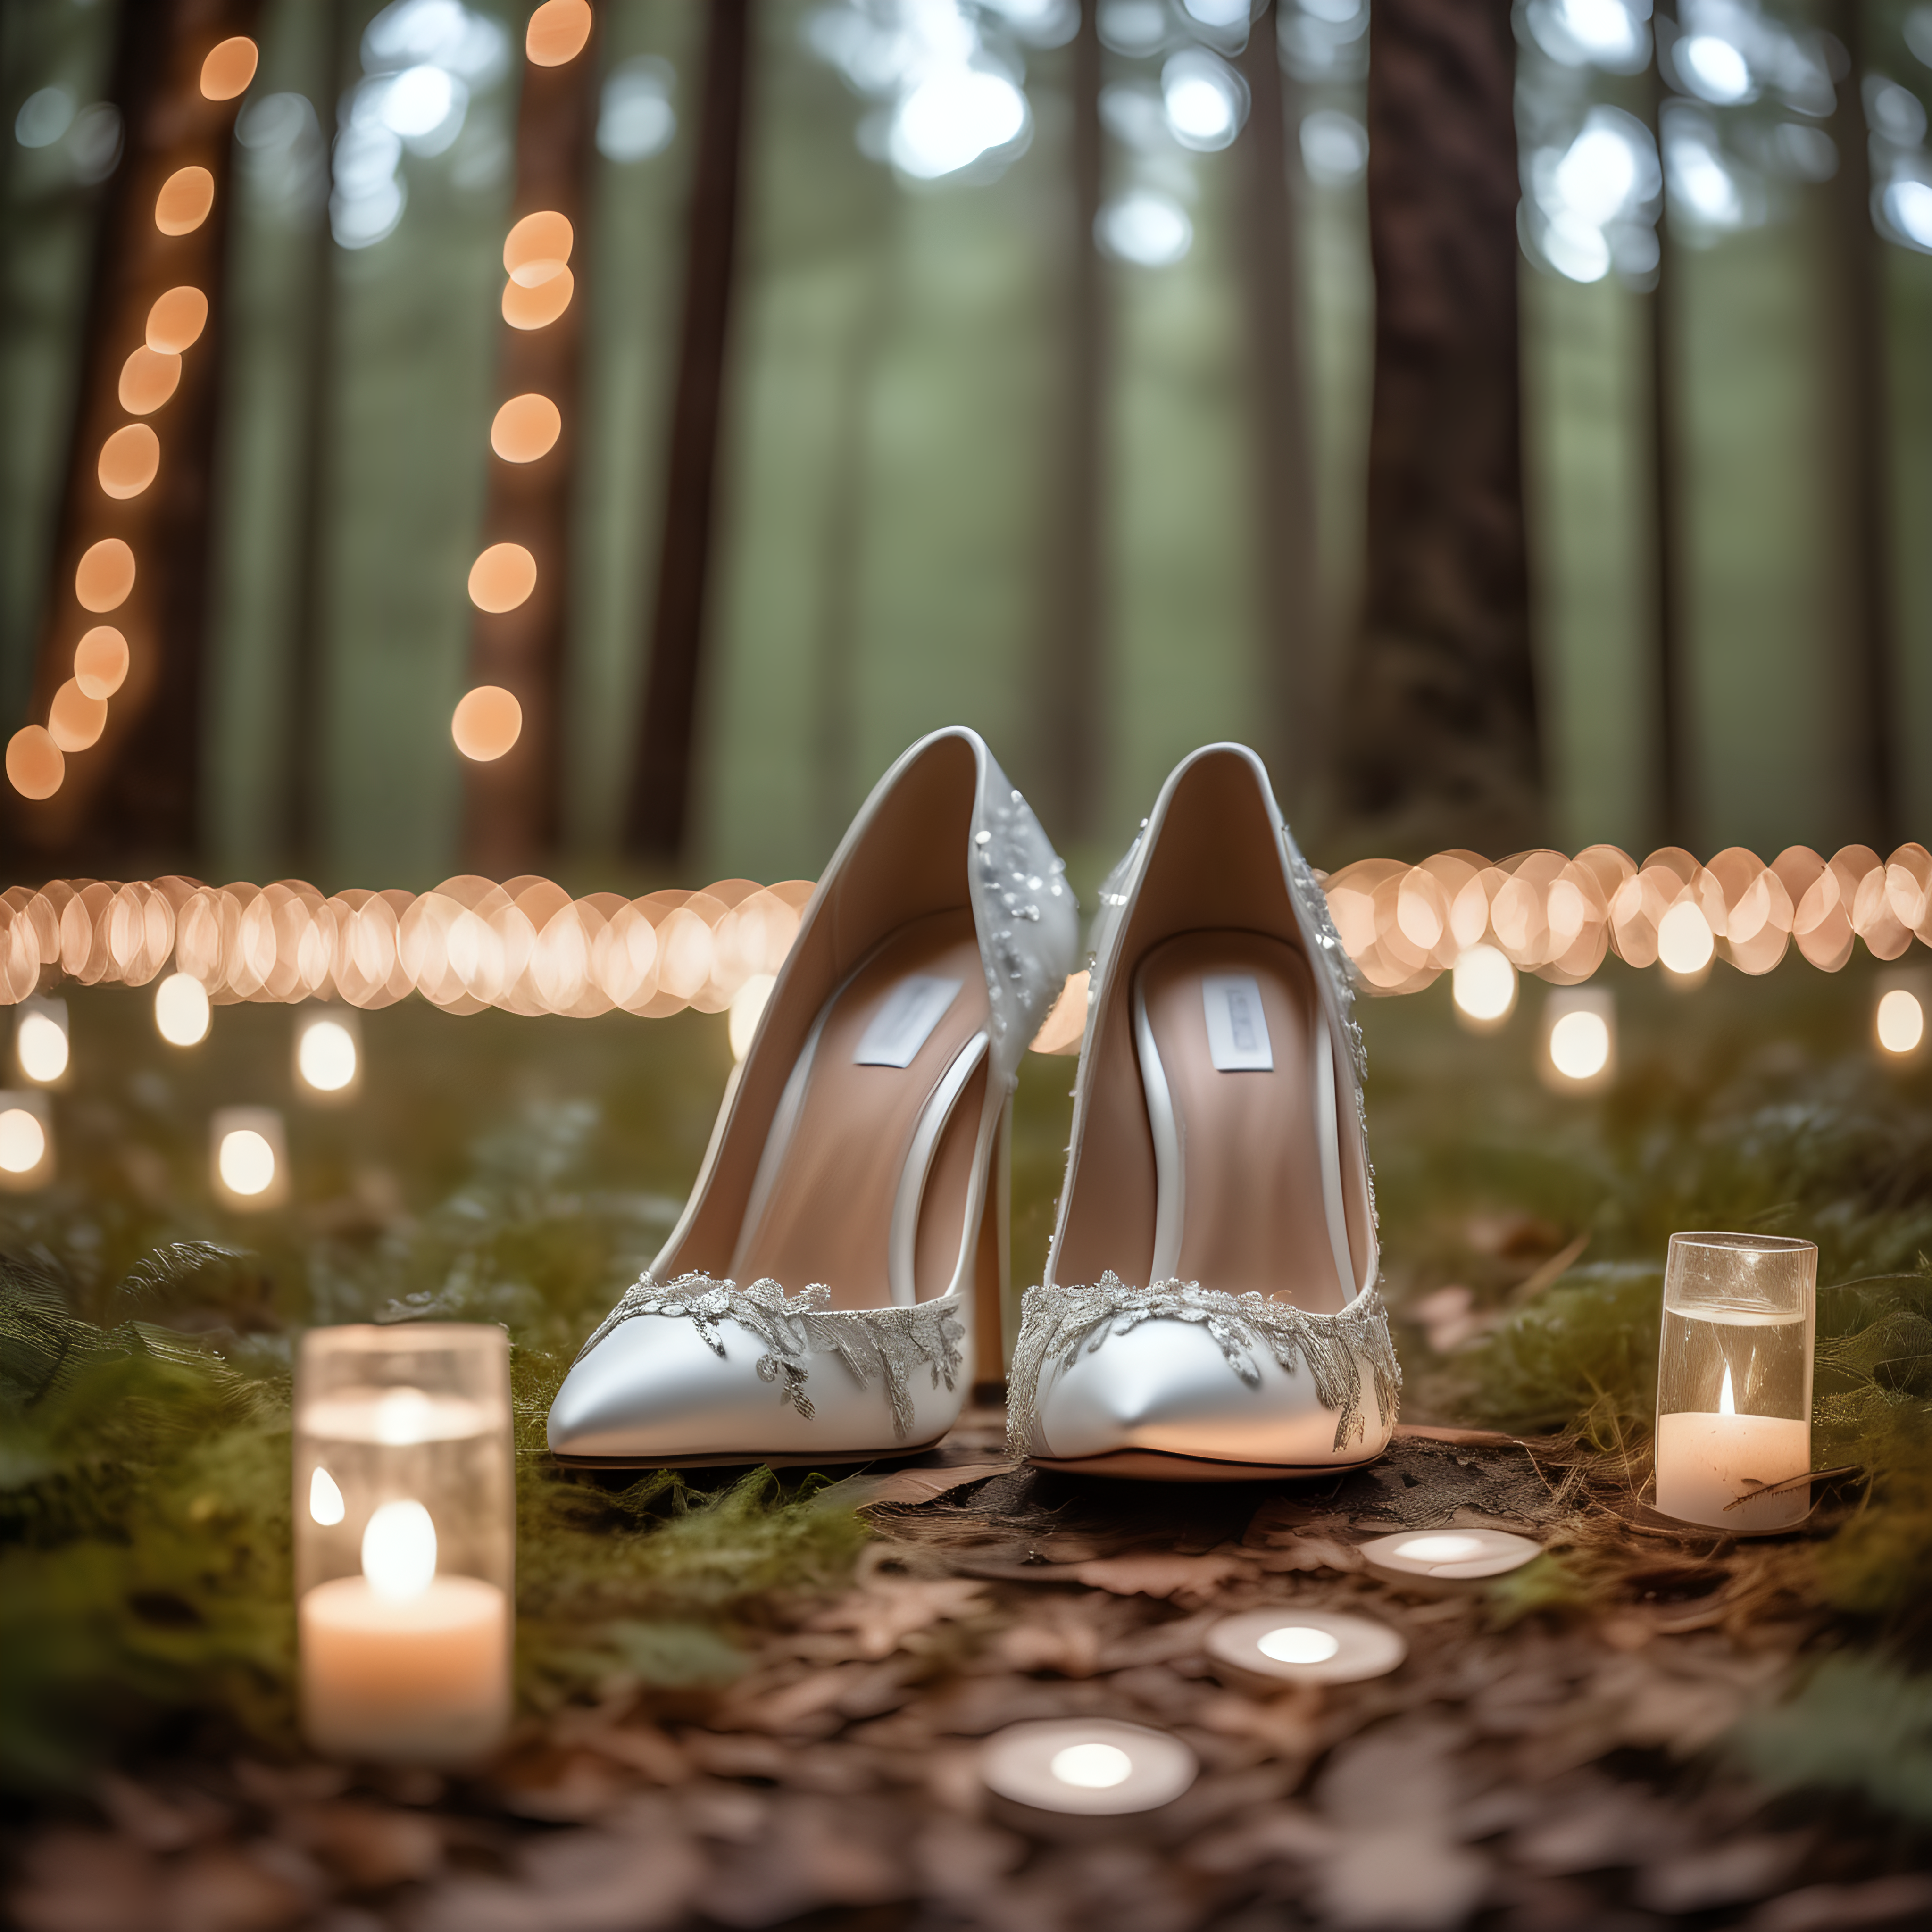 Gorgeous wedding shoes on the ground surrounded by